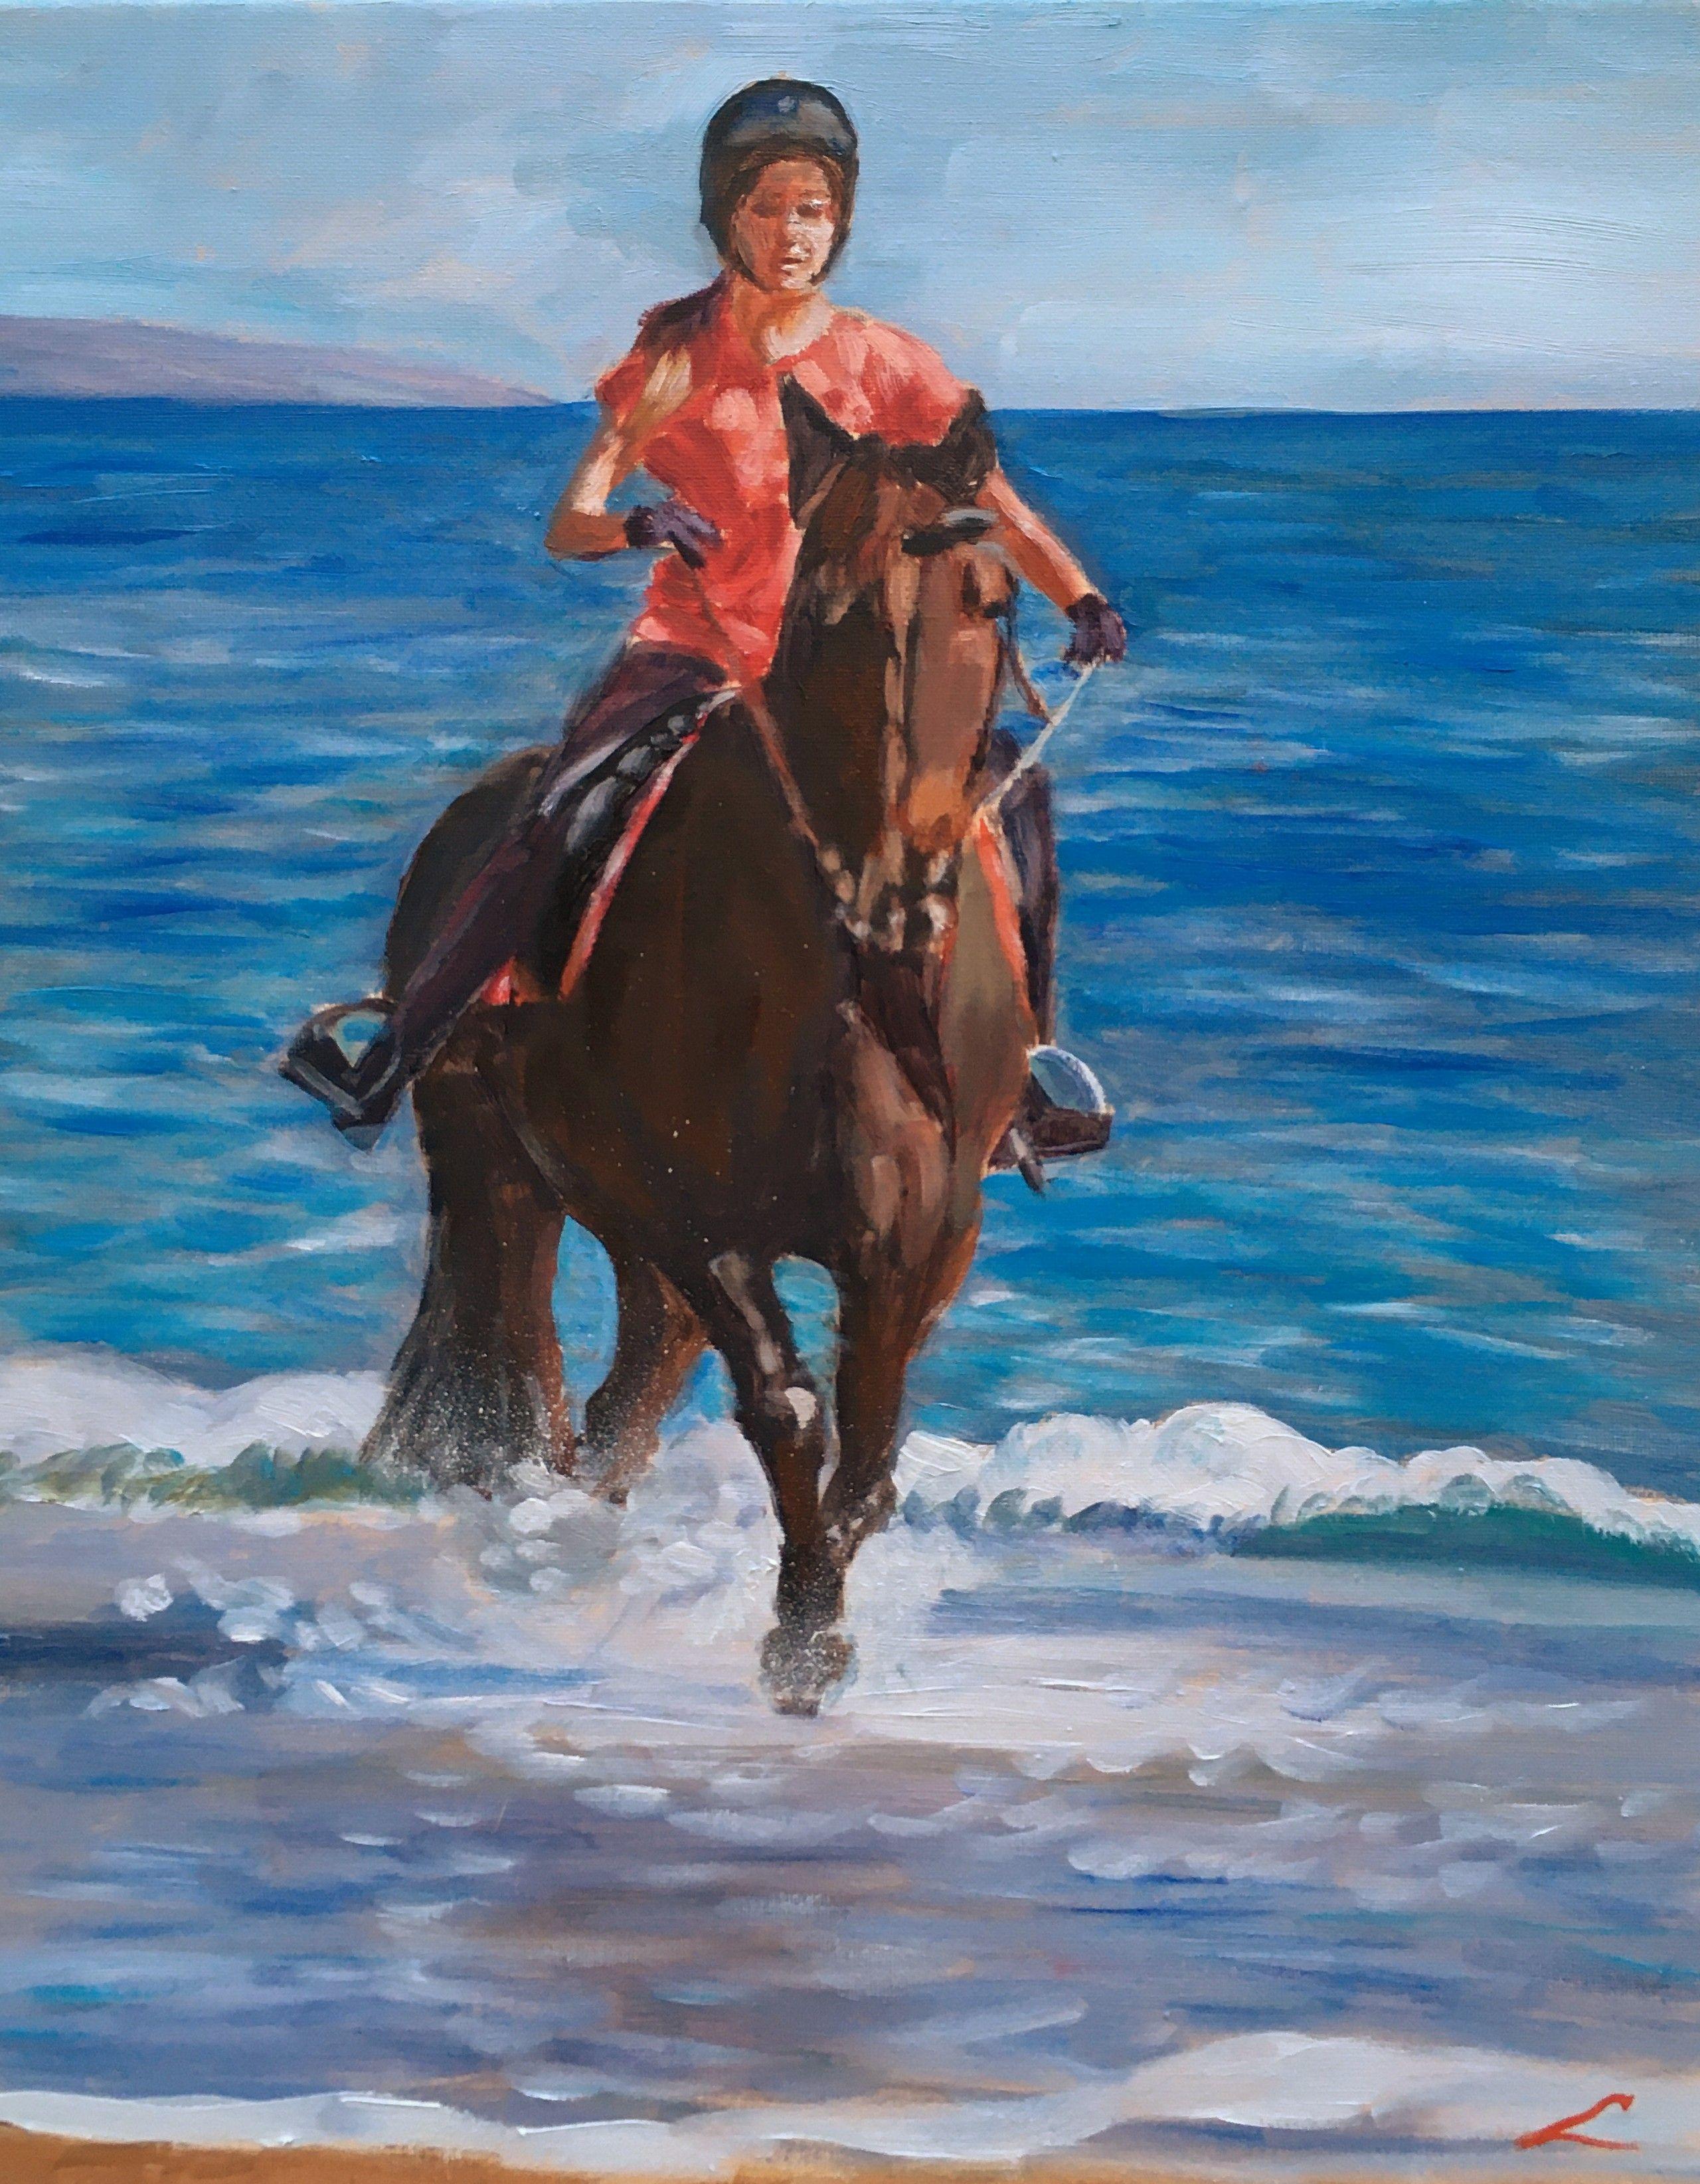 Horse riding girl at the sea. Alla prima oil painting with few final tuch when dry.  A place that is peaceful in its own ways. It is the place to go to get away from all my troubles. :: Painting :: Impressionist :: This piece comes with an official